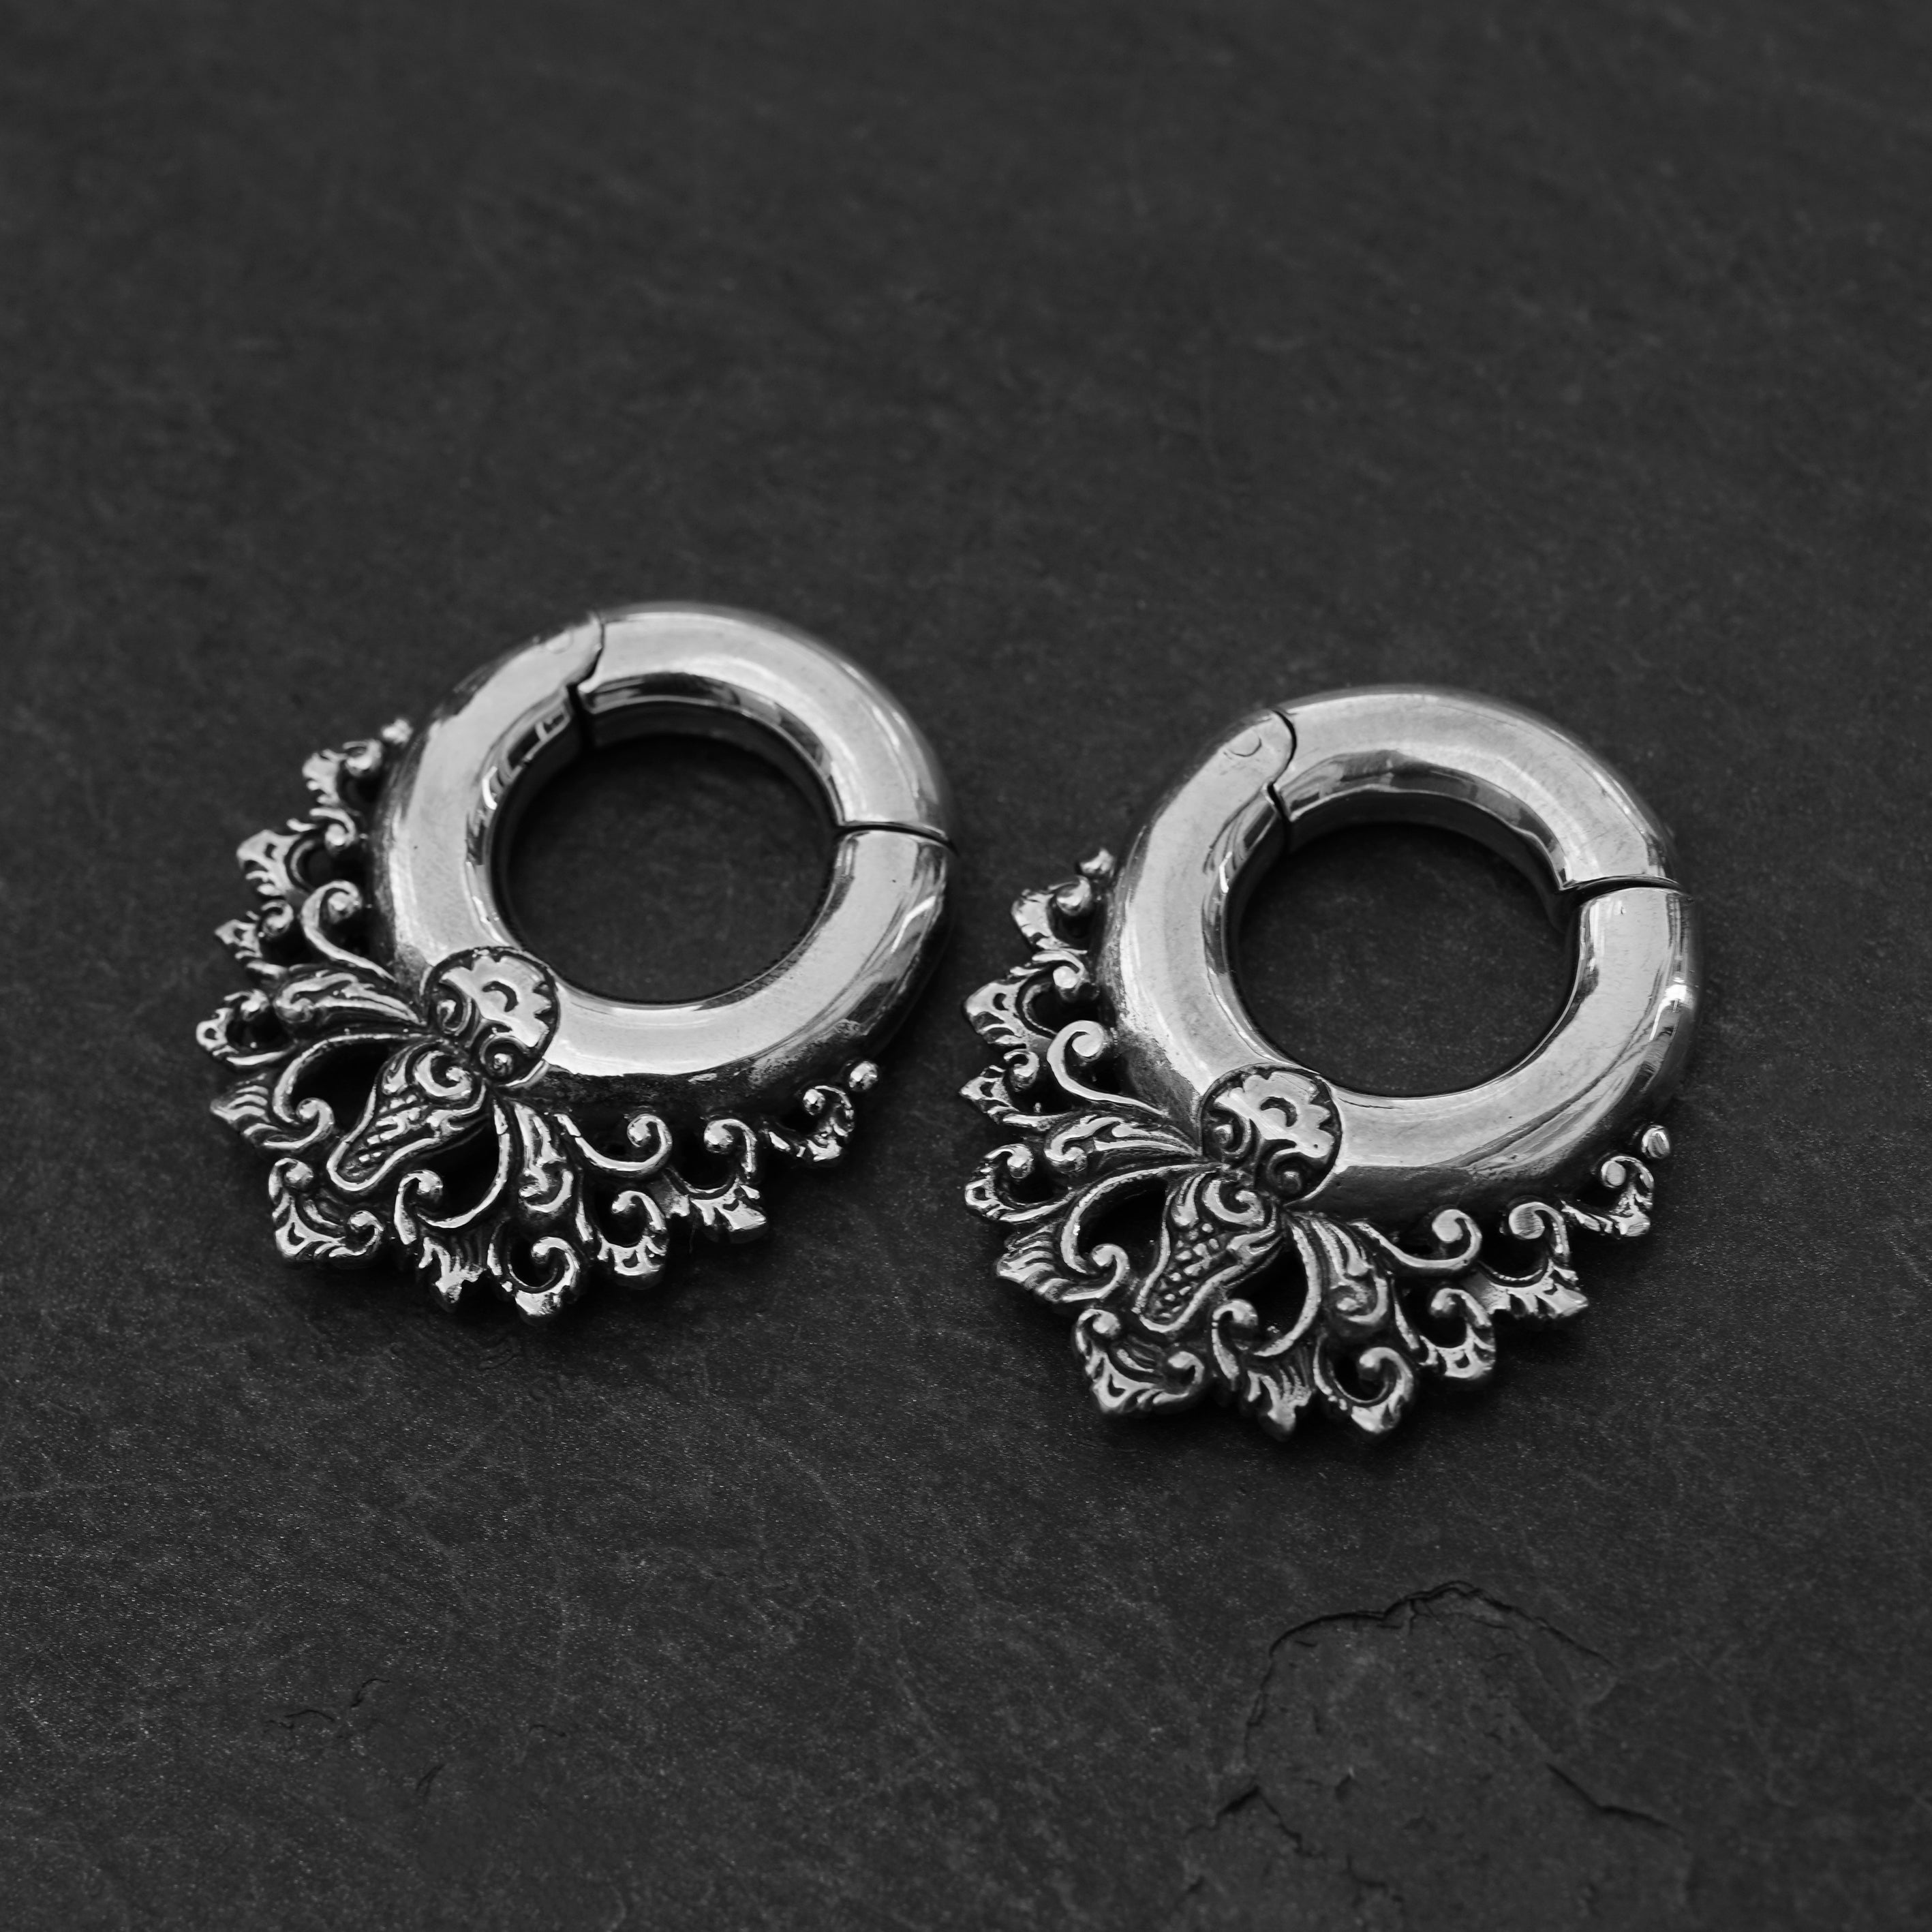 pair of silver brass ear hangers hoops with floral victorian design frontal view black background